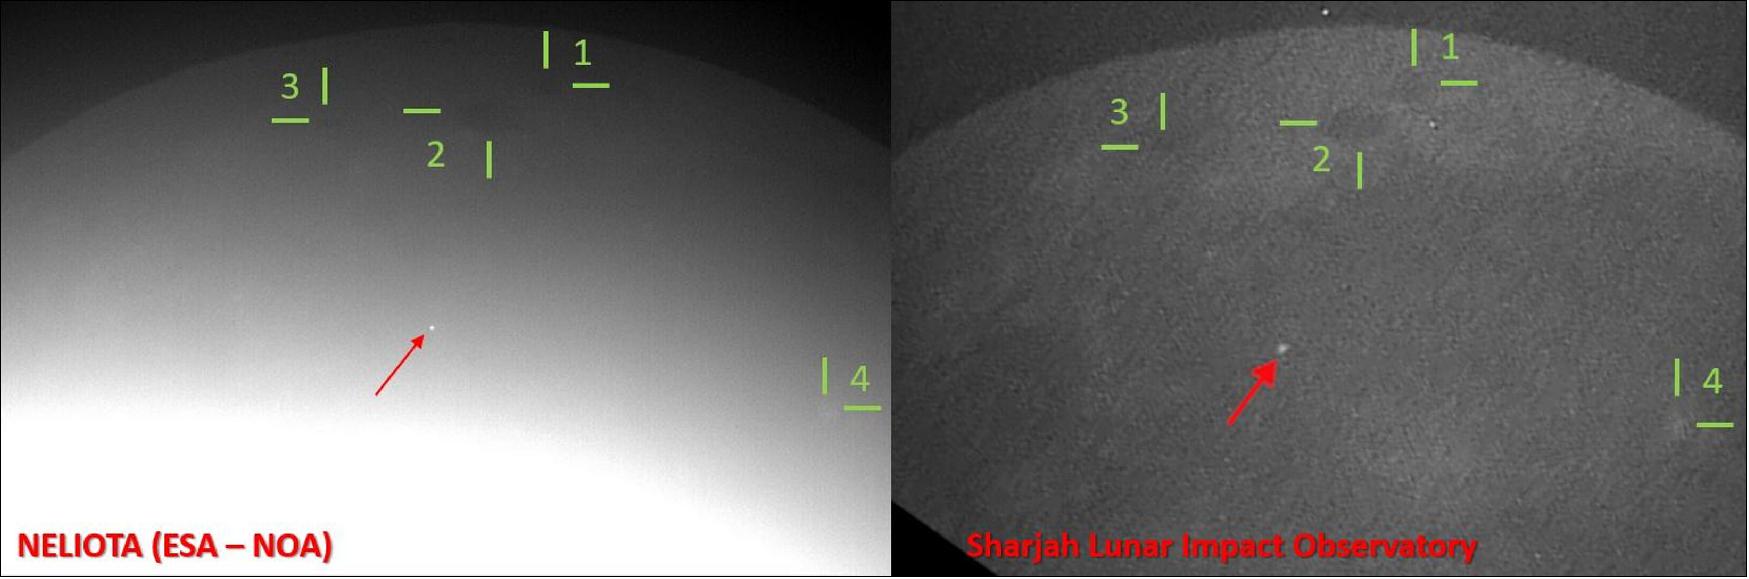 Figure 8: First joint-detection of lunar flash. Left: Lunar image showing the 100th flash (red arrow) detected by the NELIOTA project on 1 March 2020 at 16:54:24.09 UT. Right: Lunar image from the Sharjah Lunar Impact Observatory showing the same flash (red arrow). The numbered areas in both images indicate lunar features used for the comparison. The lunar north pole is on the right (image credit: ESA)